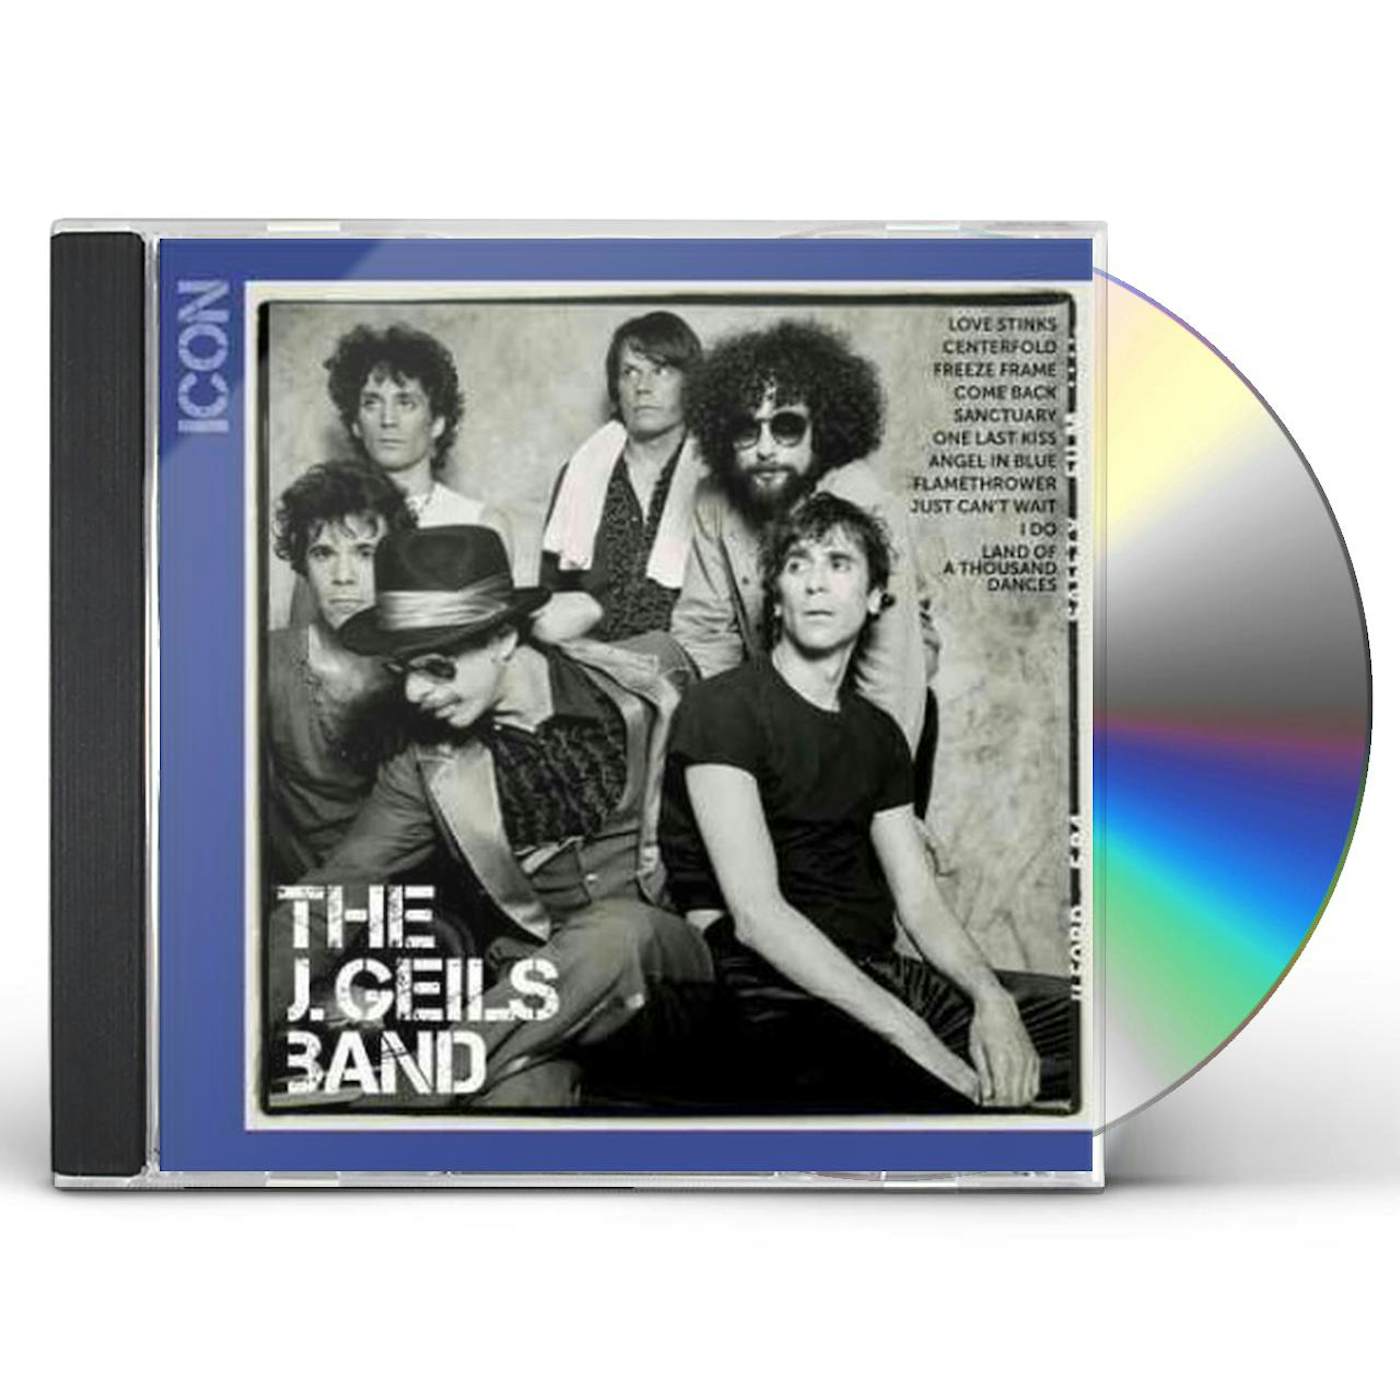 The J. Geils Band ICON CD